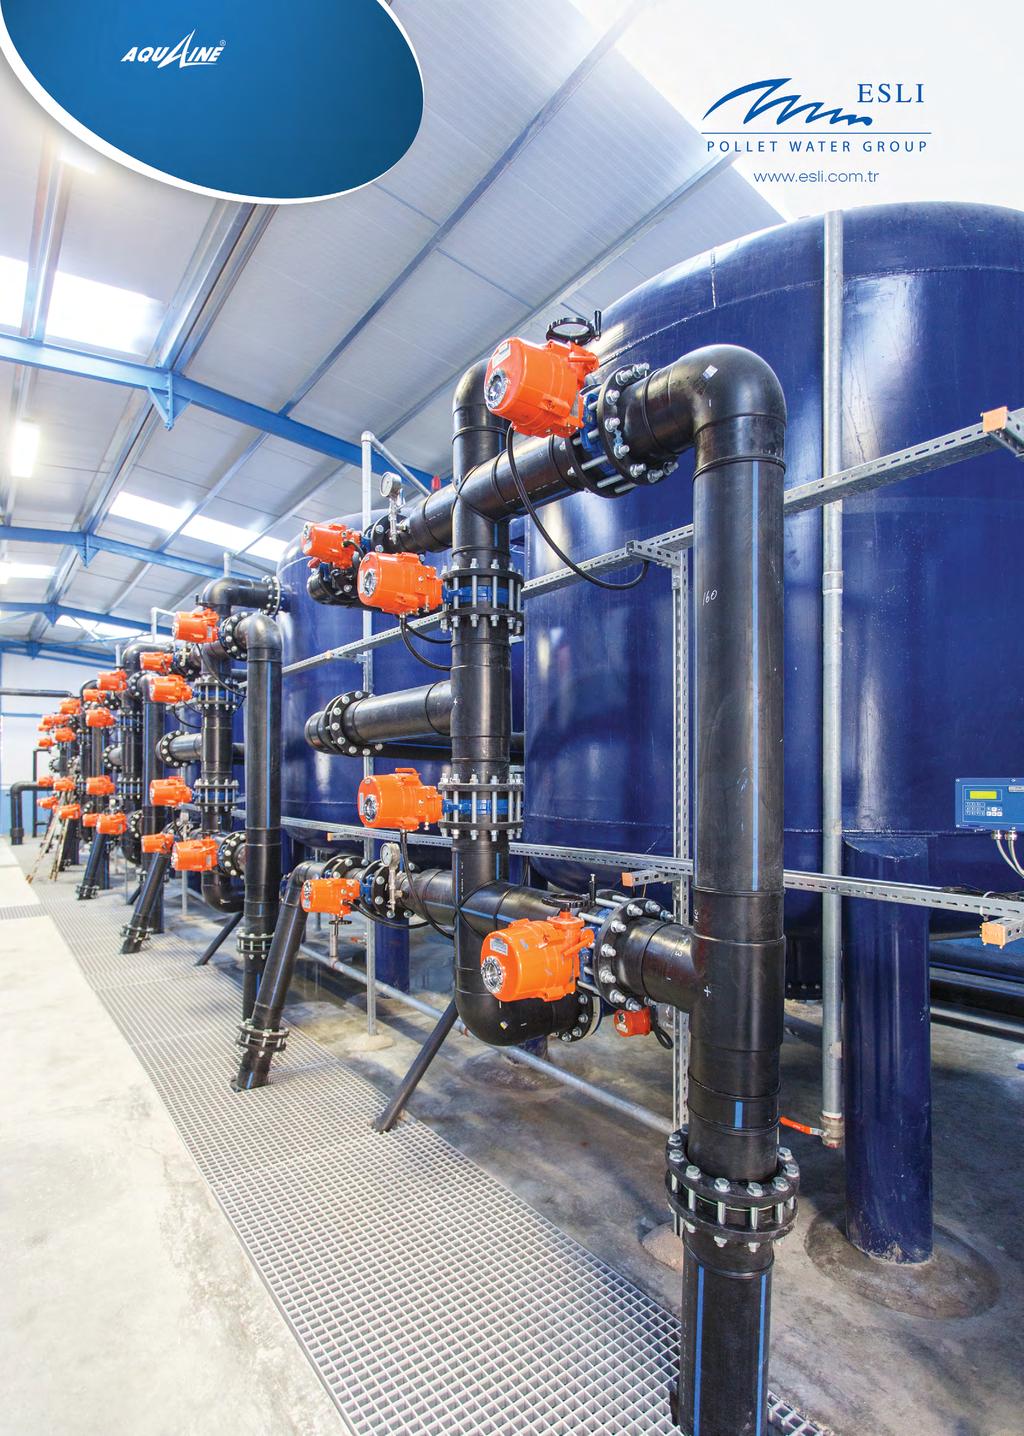 Aqualine Multi Media Filters with Surface Piping are used in systems of 20 m 3 /hour and more capacity to decrease suspended solids in water, removing turbidity and all particulates from water, which